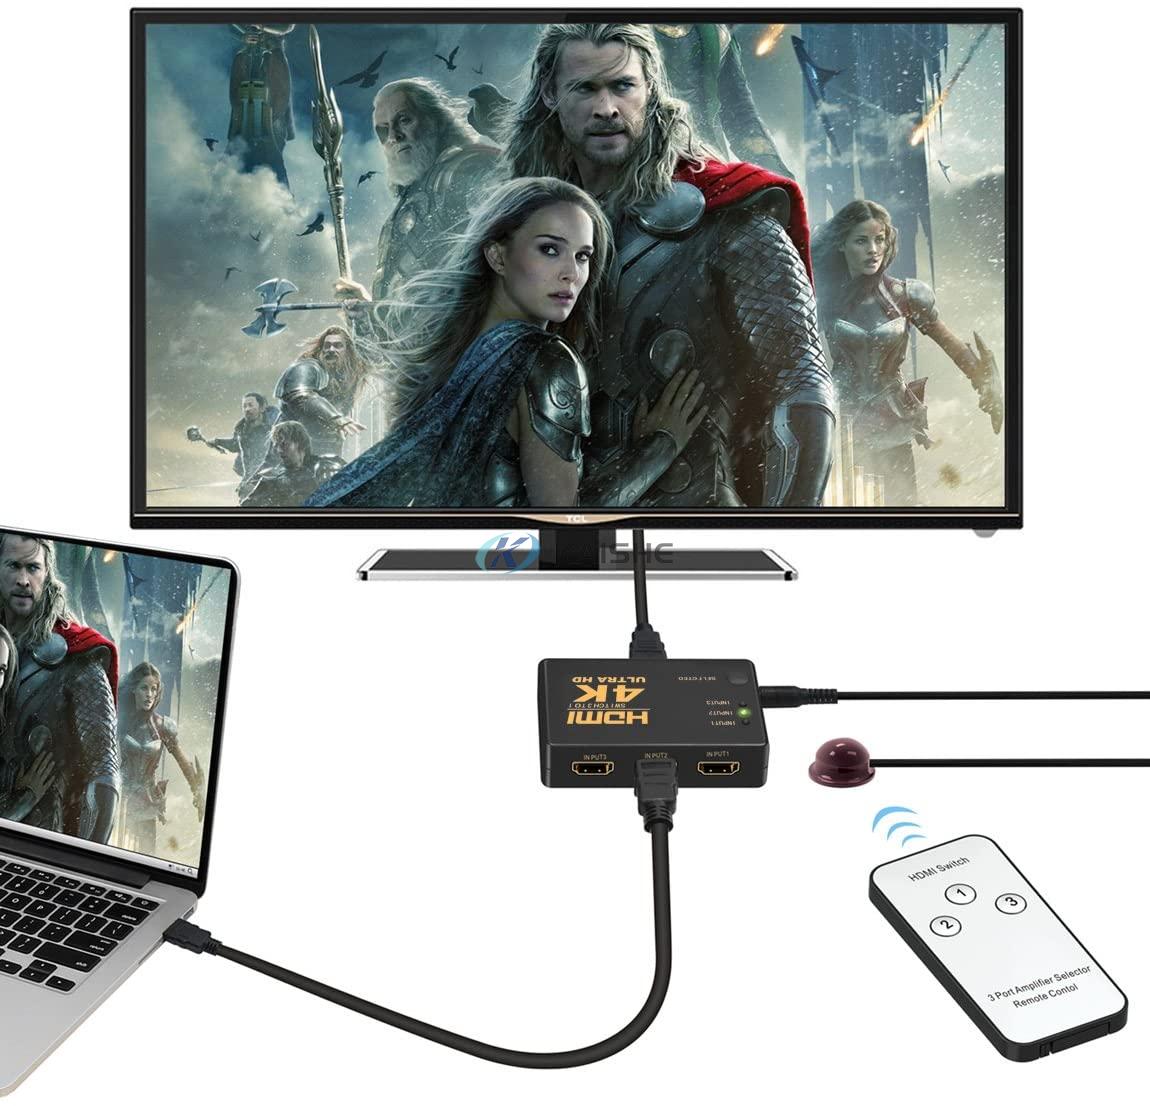  3-Port HDMI Switcher Supports 4K with IR Remote